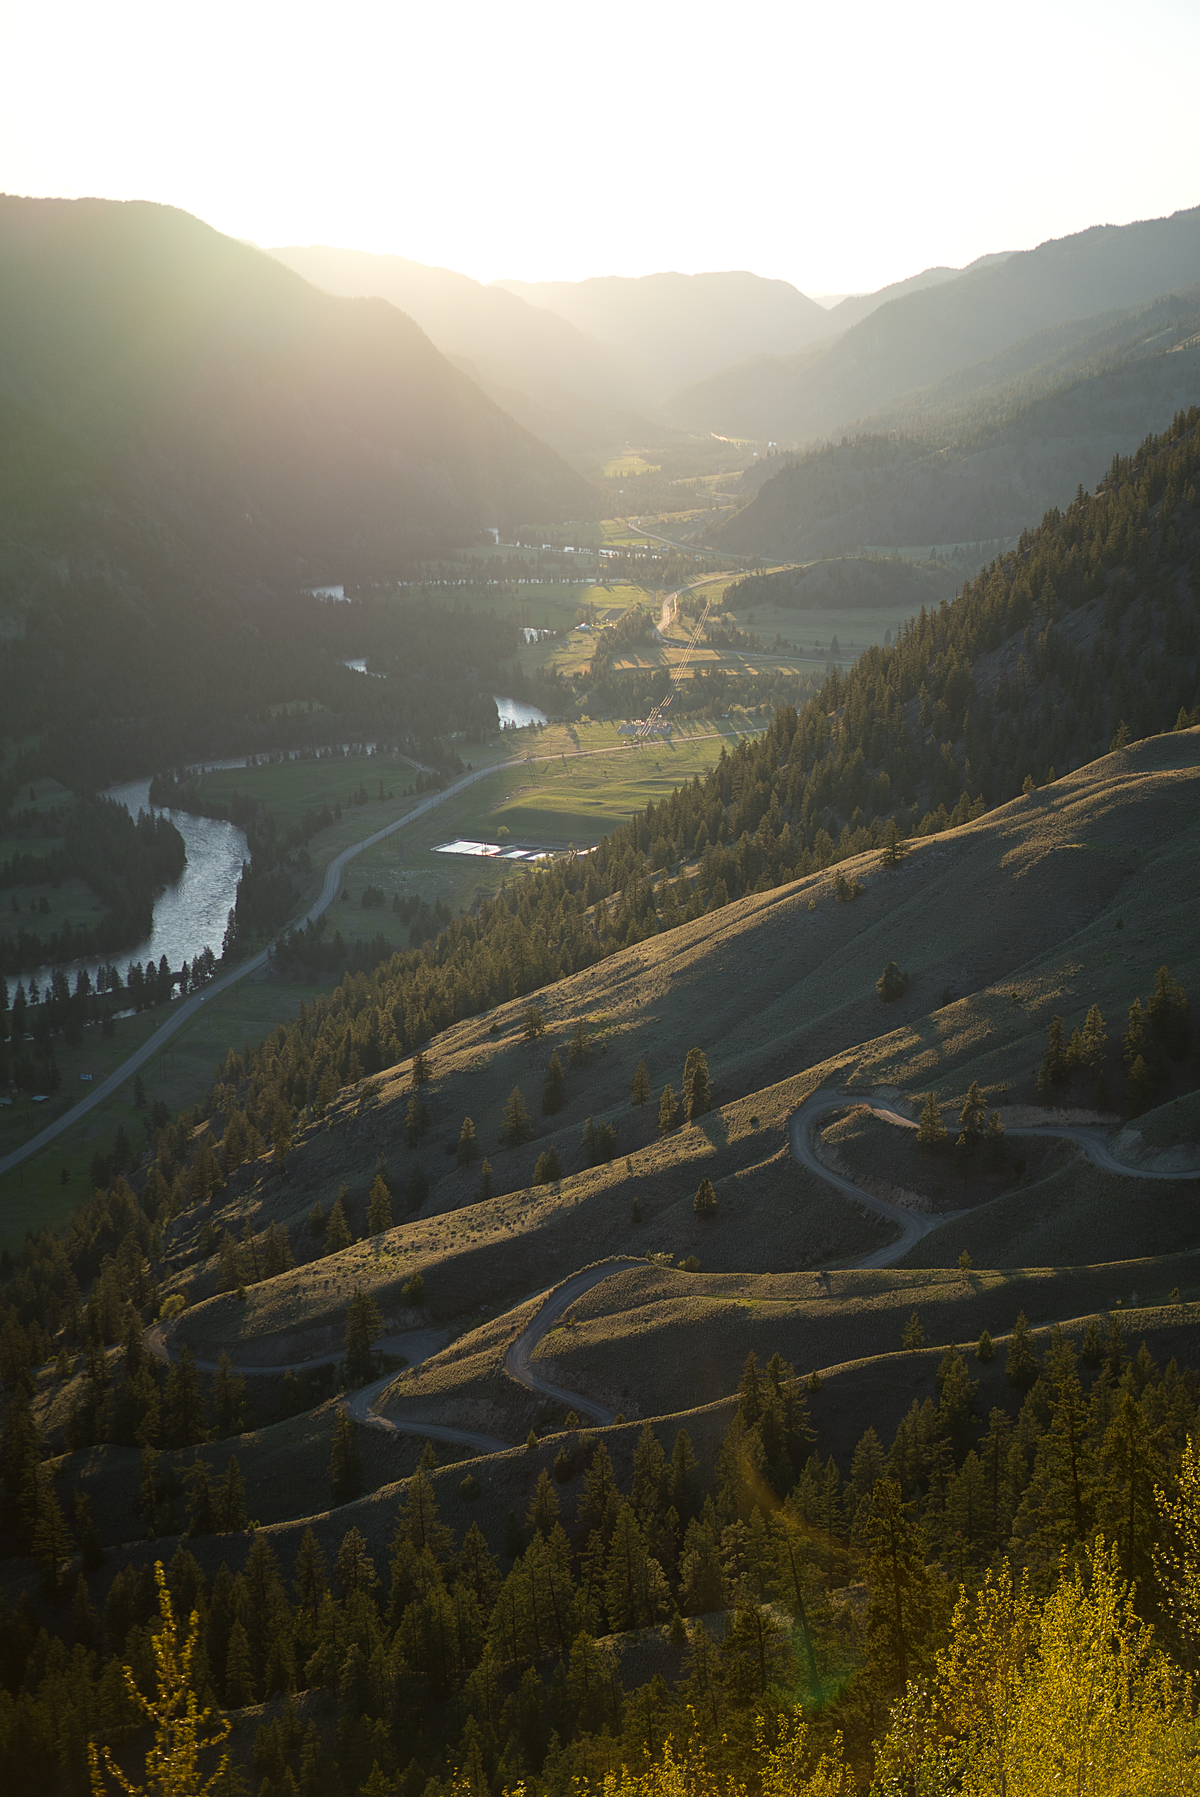 Sunset over the river in Similkameen Valley. The steep mountains lead down to the lush landscape and river below.